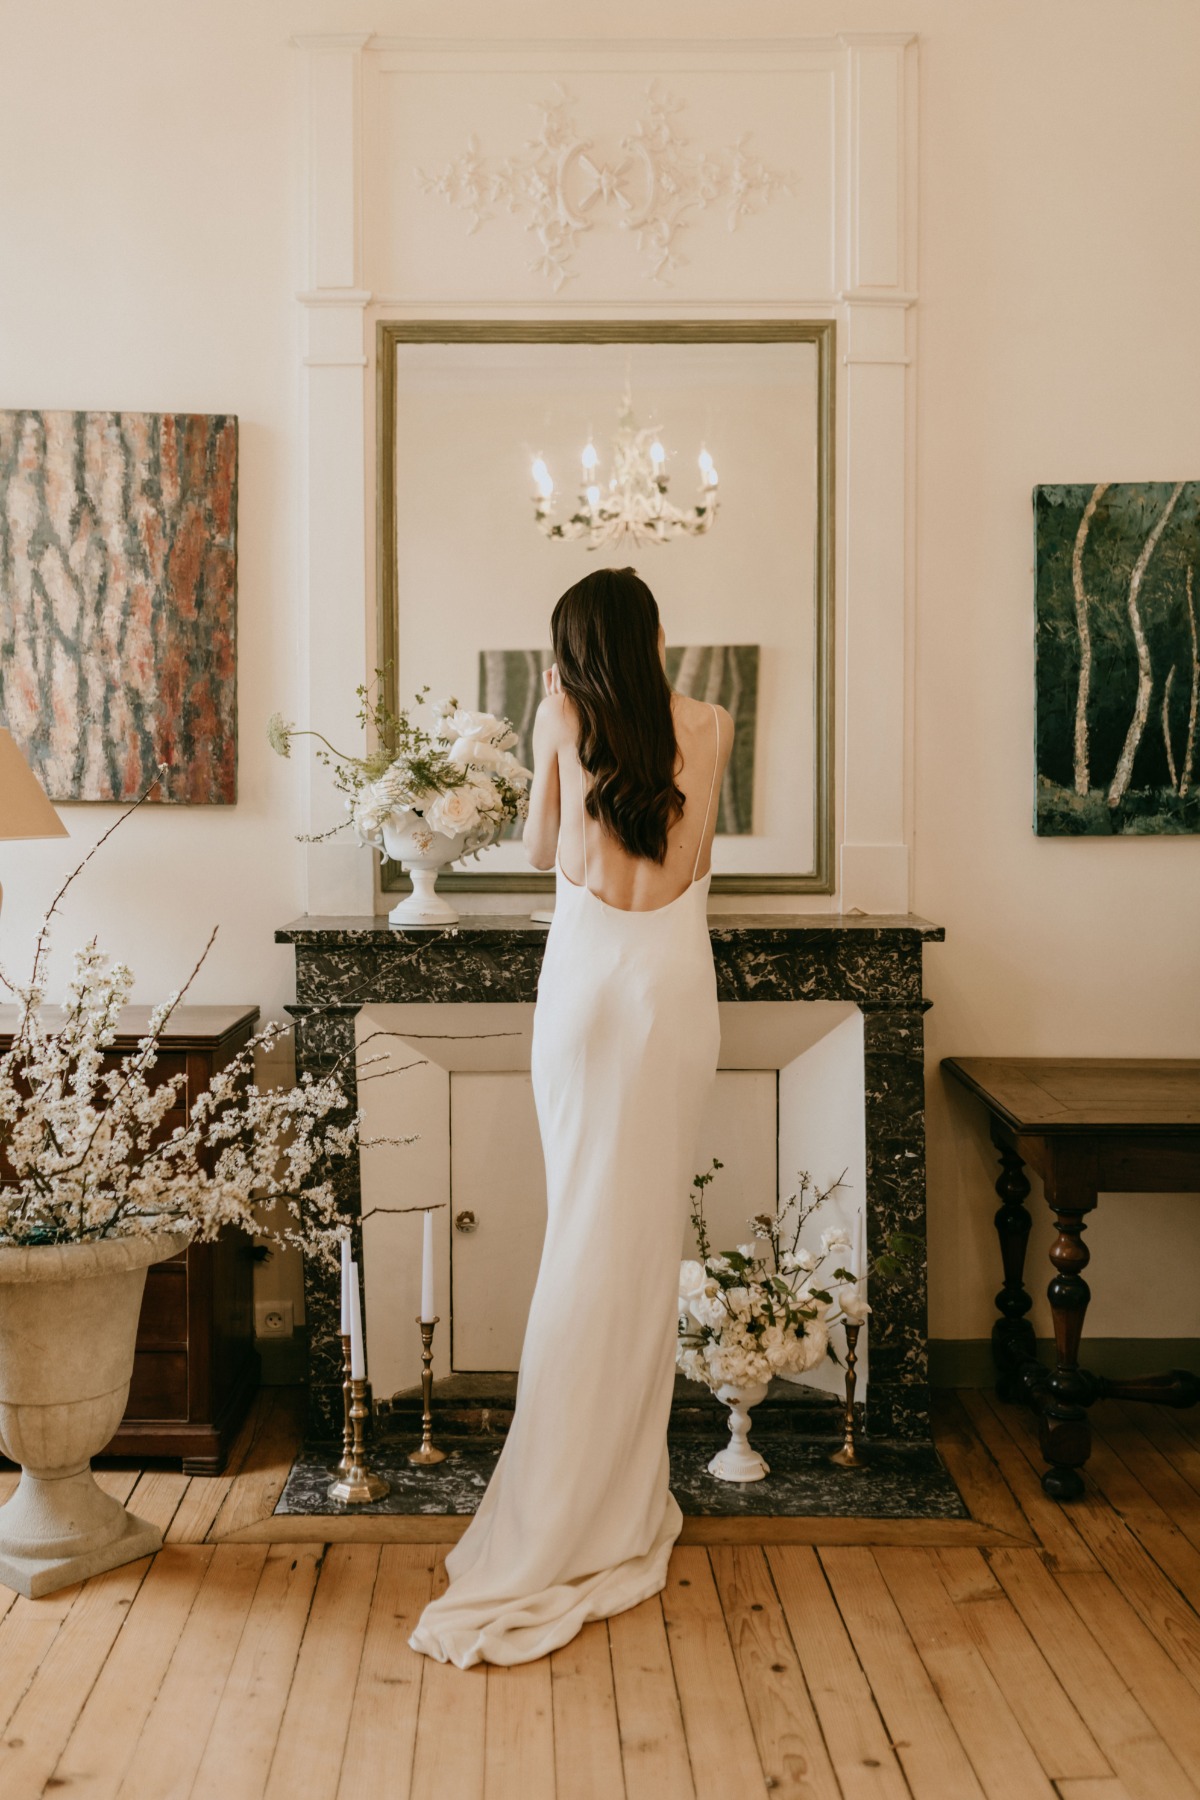 Minimalist Inspiration Shoot At A French ChÃ¢teau That Makes Elegance Look Effortless